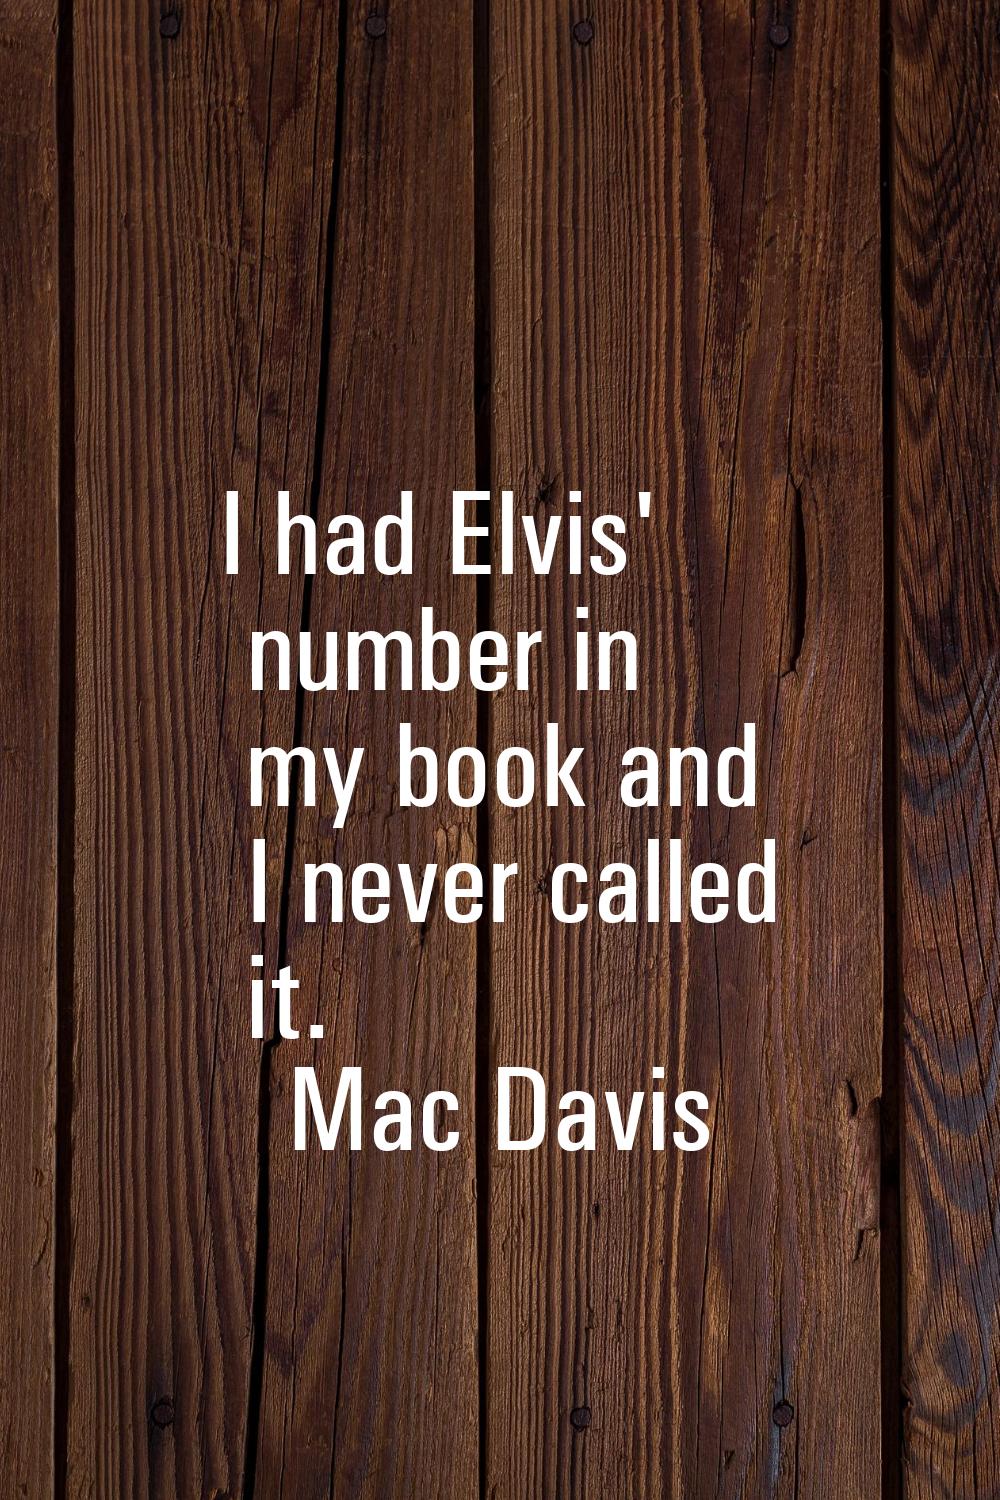 I had Elvis' number in my book and I never called it.